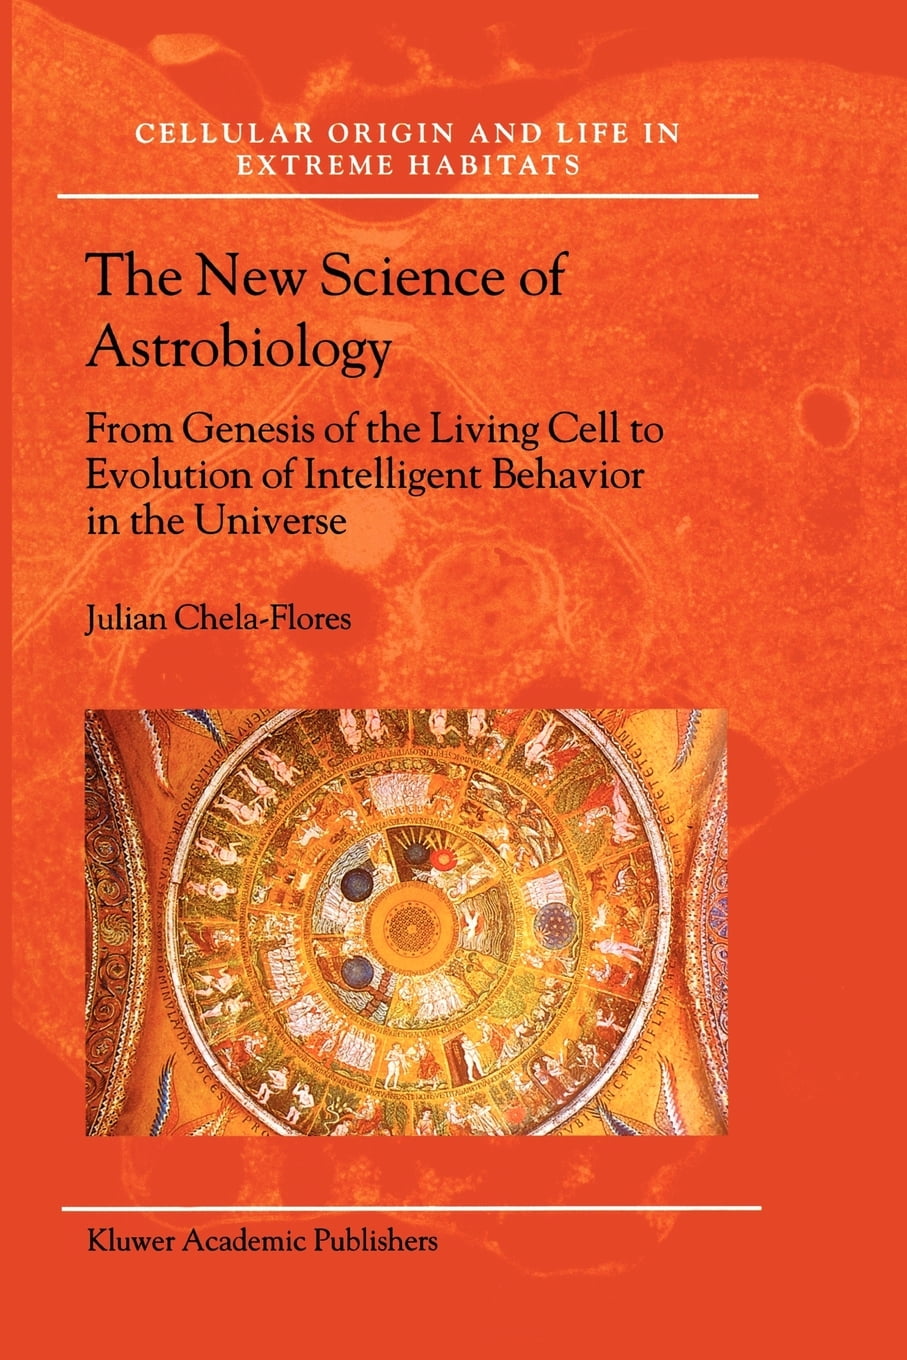 Cellular Origin, Life in Extreme Habitats and Astrobiology ...